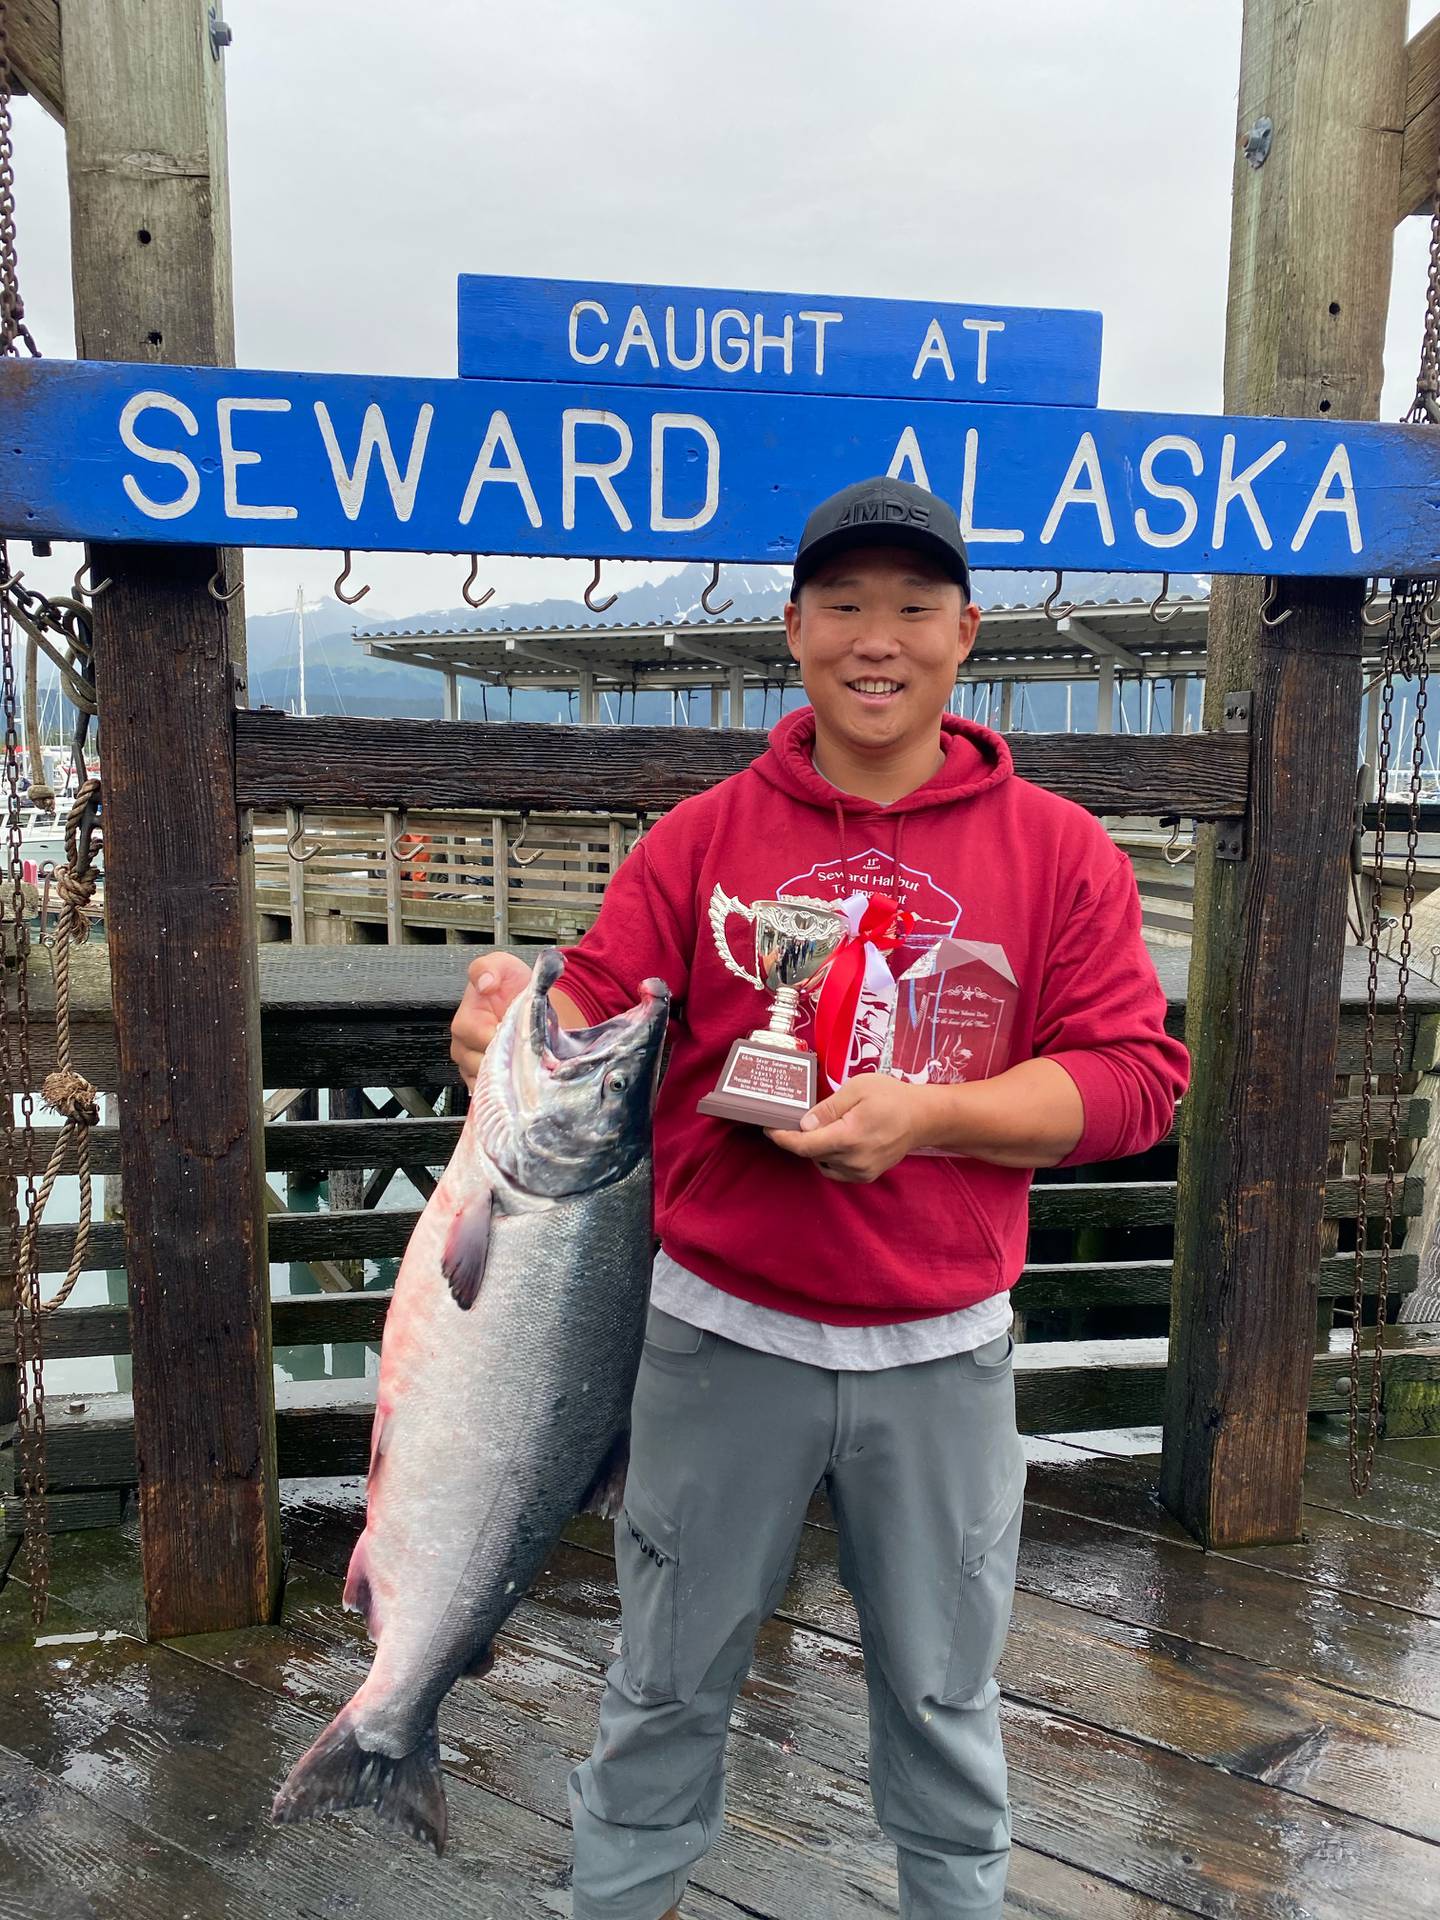 The 66th annual Seward Silver Salmon Derby is decided in the final